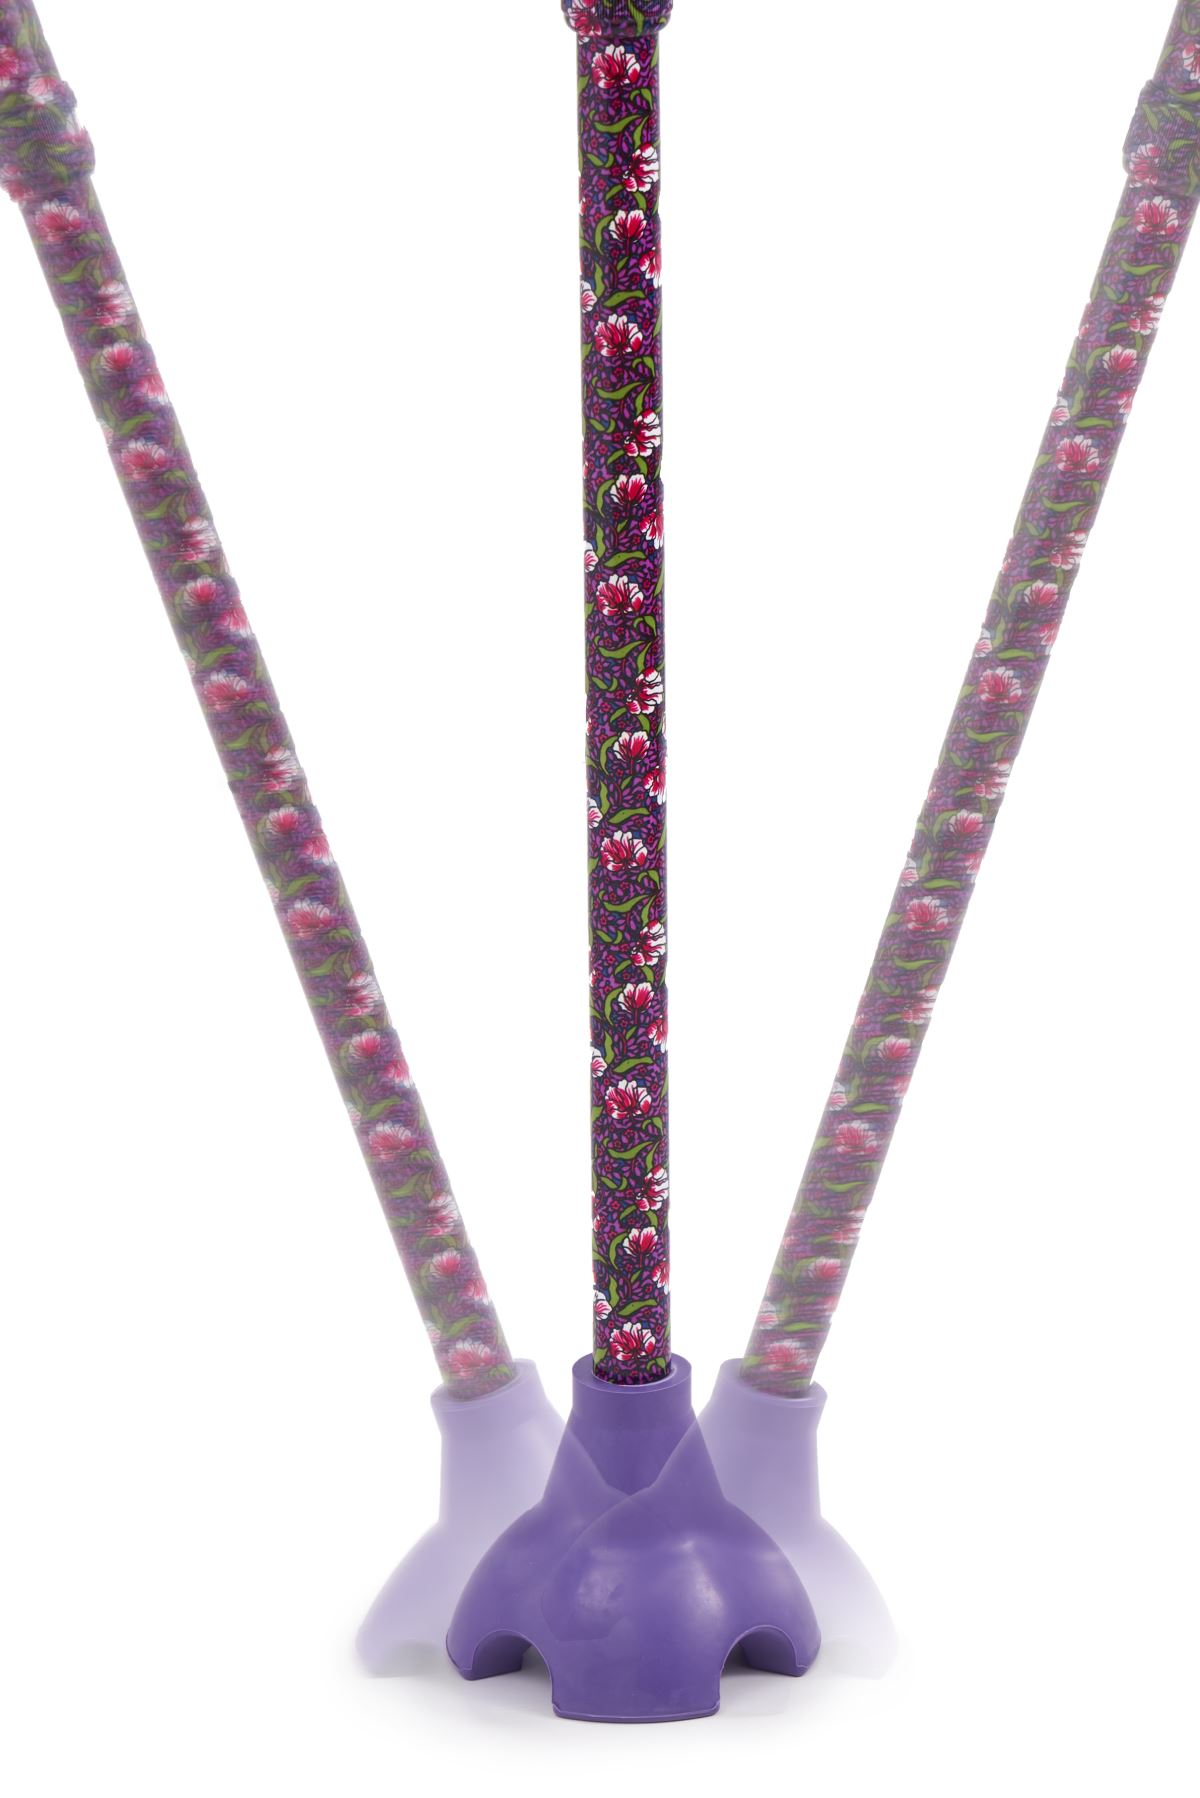 The elastic quad base makes the cane more stable and anti-skid from different angles.